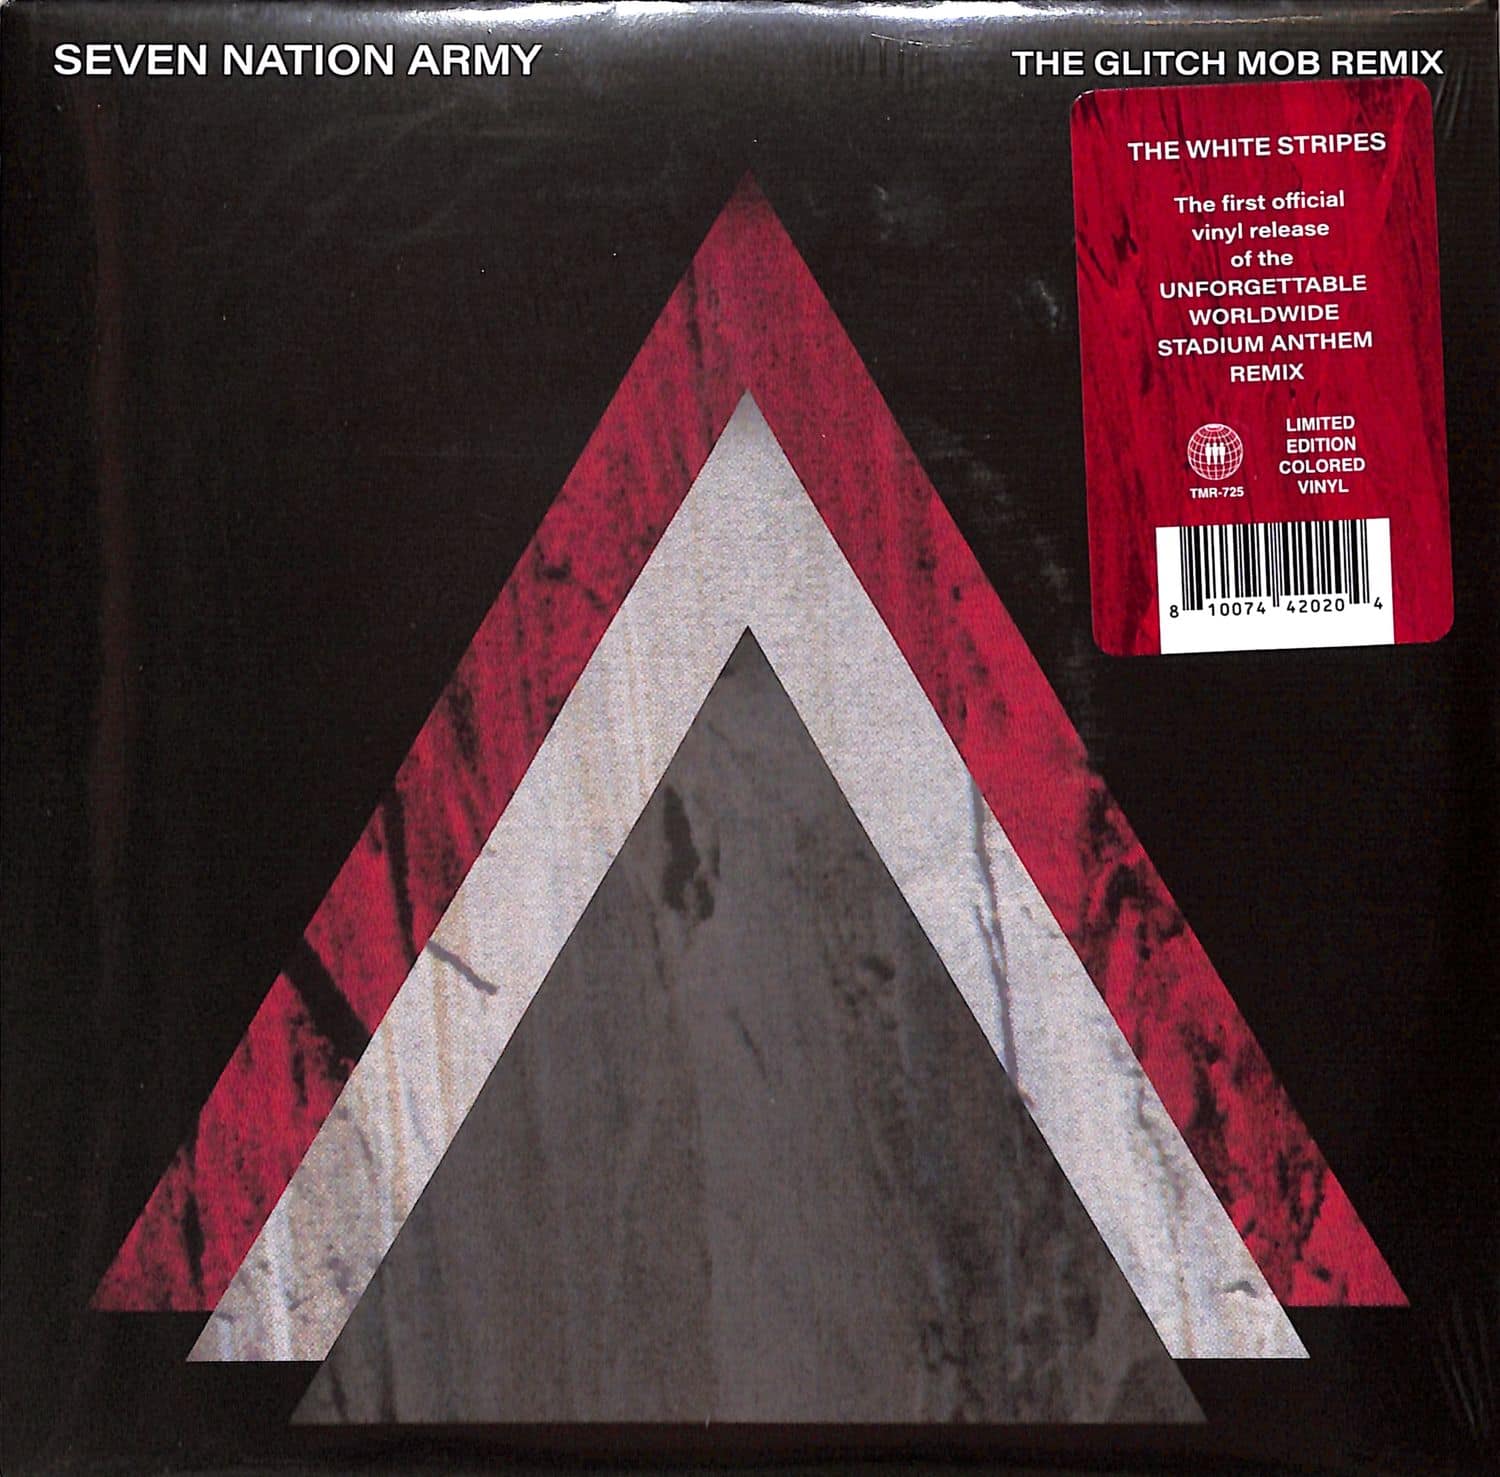 The White Stripes - SEVEN NATION ARMY X THSEVEN NATION ARMY X THE GLITCH MOB 